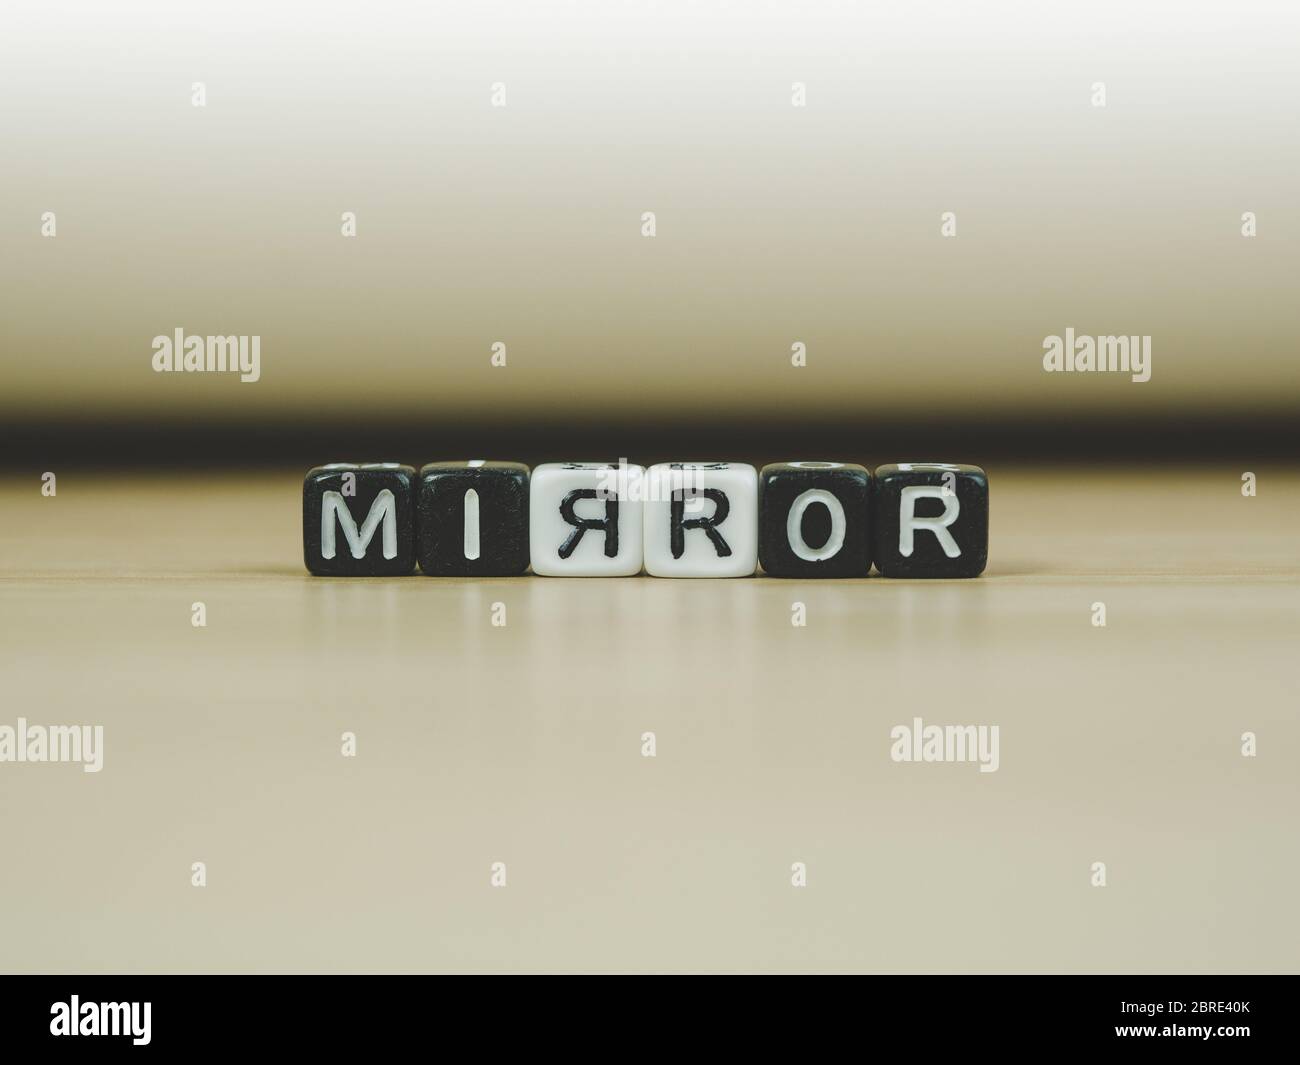 MIRROR word written in  cube on wooden floor on white background, letter blocks arranges into MIRROR words, for adding text or other images or design Stock Photo